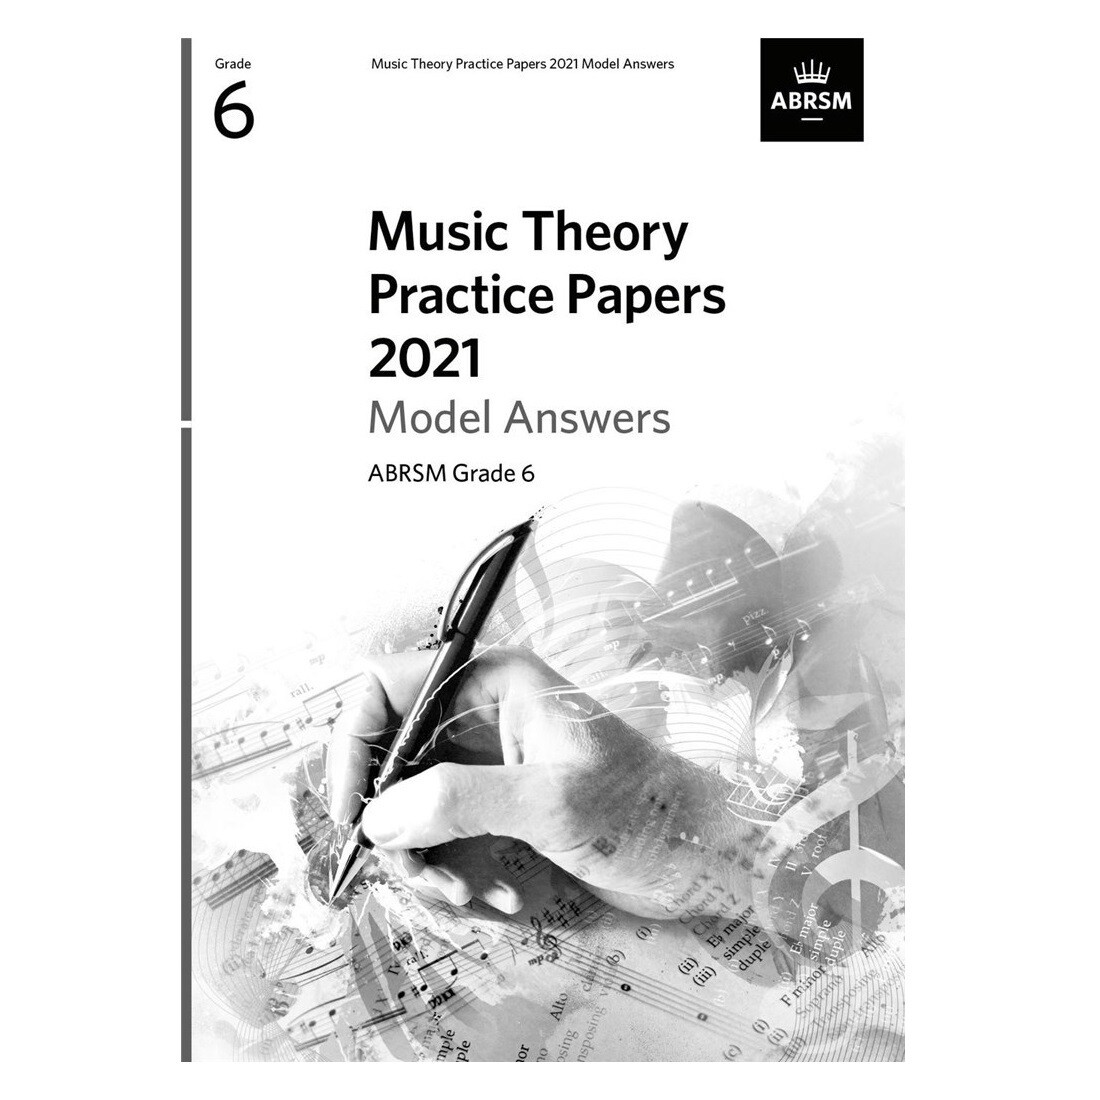 ABRSM Music Theory Practice Papers 2021 Model Answers: Grade 6